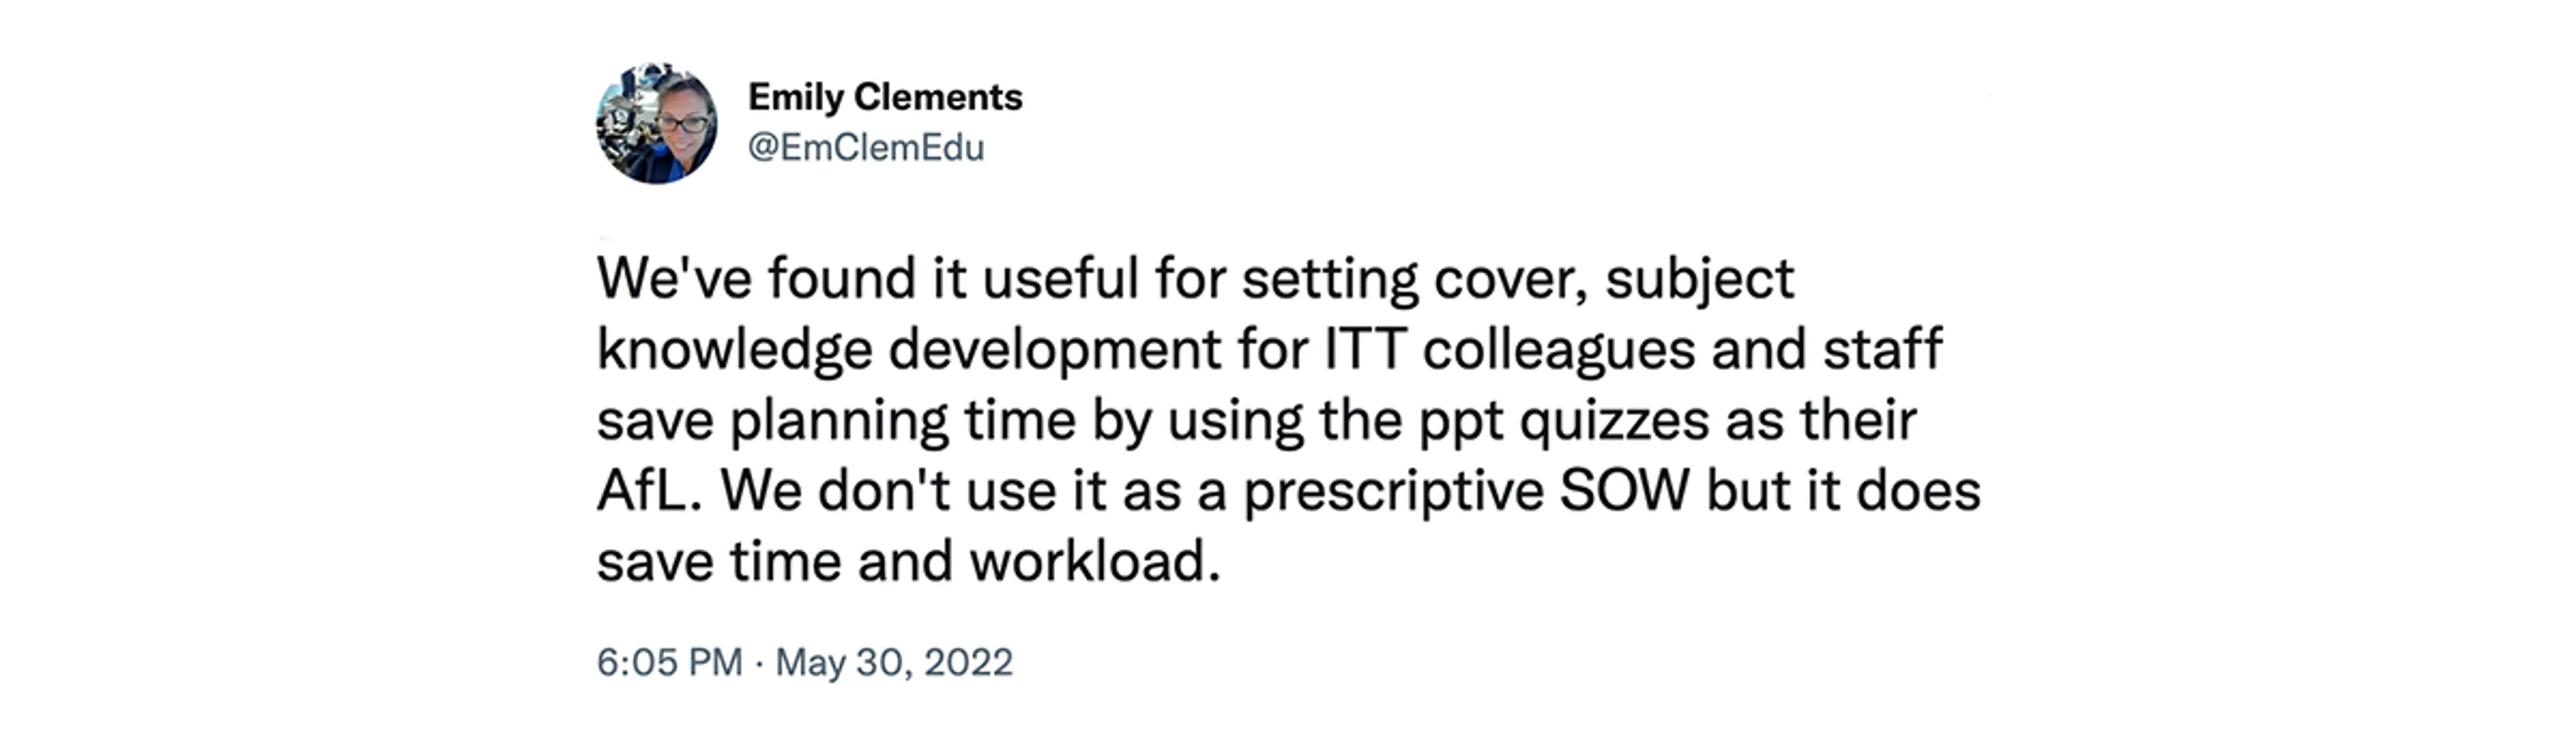 Screenshot of tweet from EmClemEdu at 6.05pm on May 30, 2022 saying "We've found it useful for setting cover, subject knowledge development for ITT colleagues and staff save planning time by using the ppt quizzes as their AfL. We don't use it as a prescriptive SOW but it does save time and workload."